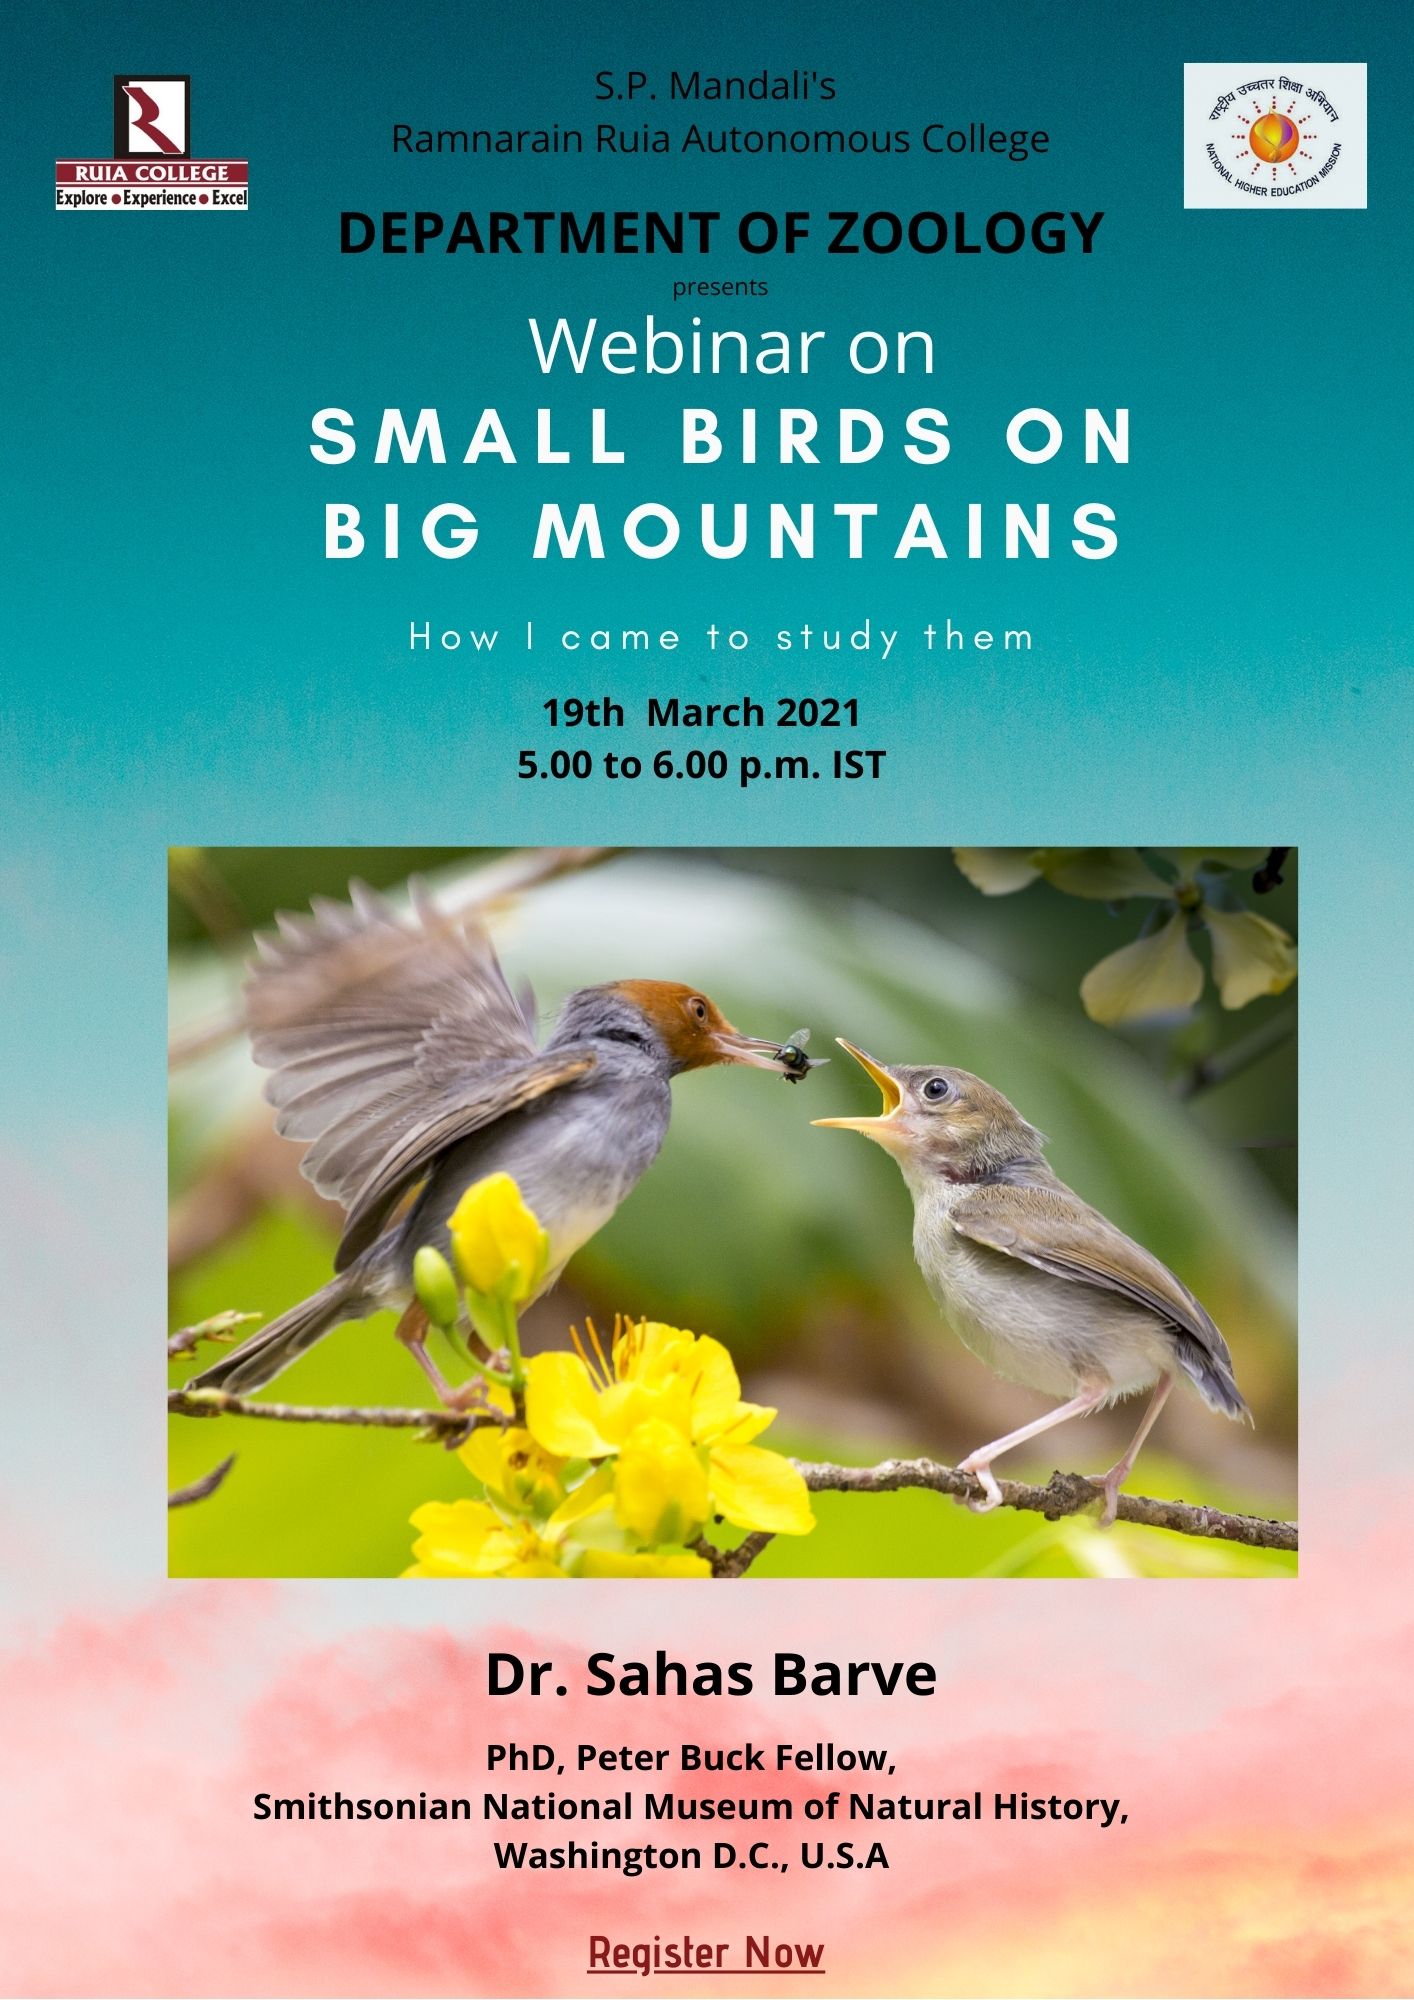 Department of Zoology Alumni Interaction- 1- Small birds on big mountains and how I came to study them?